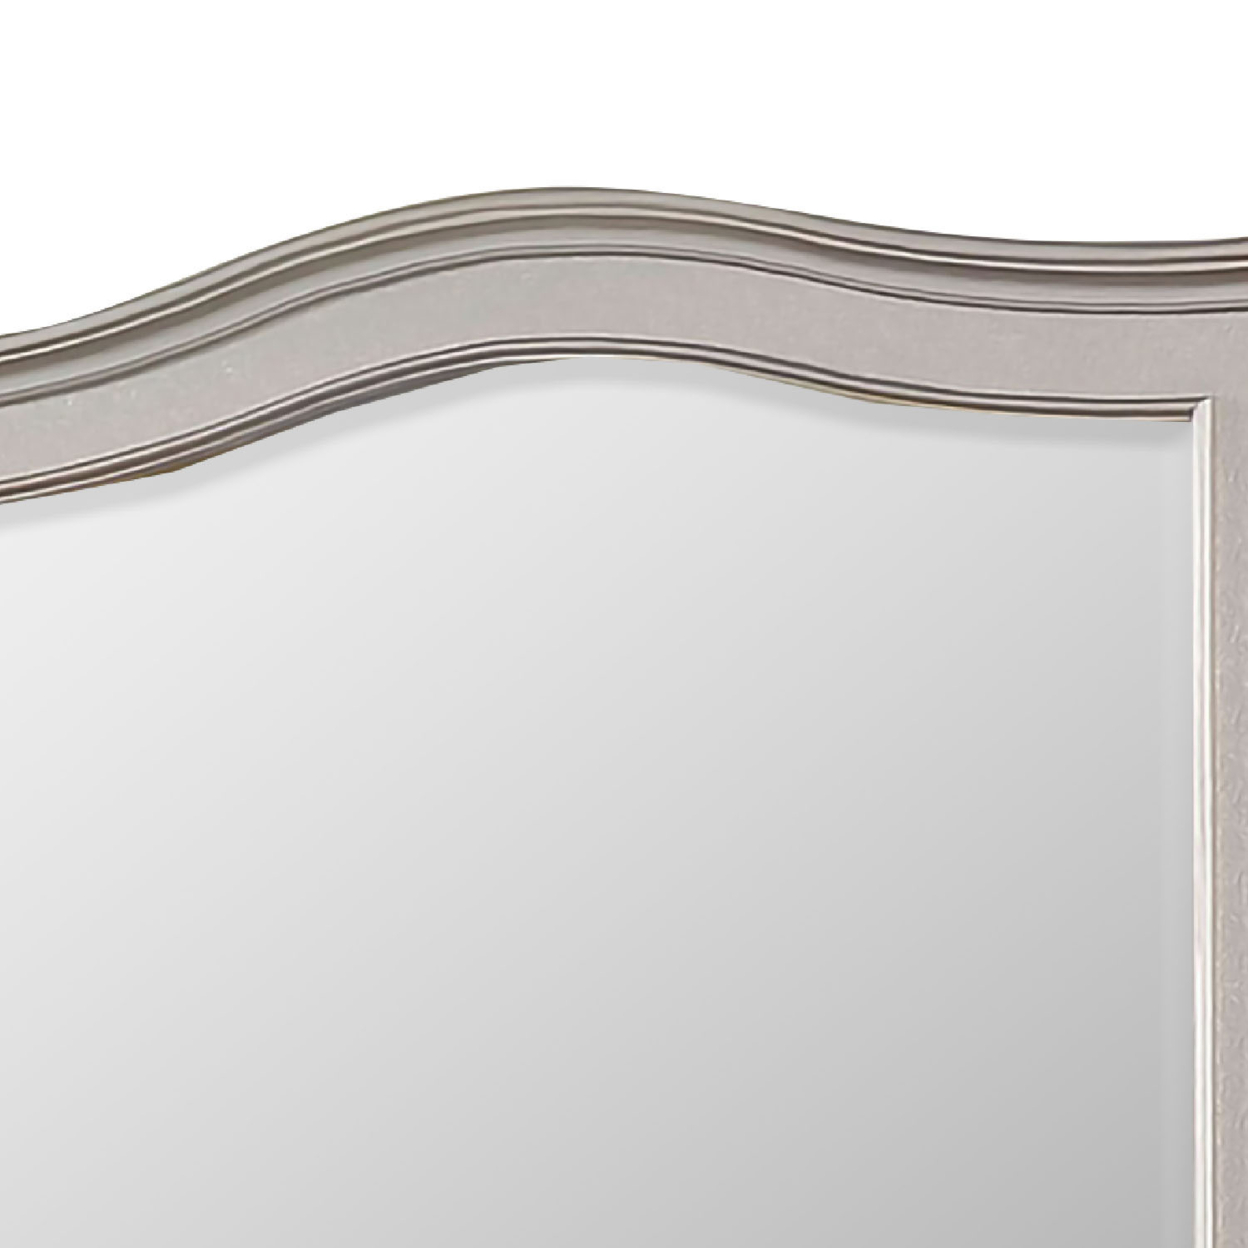 Curved Top Wooden Frame Mirror With Molded Details, Silver- Saltoro Sherpi